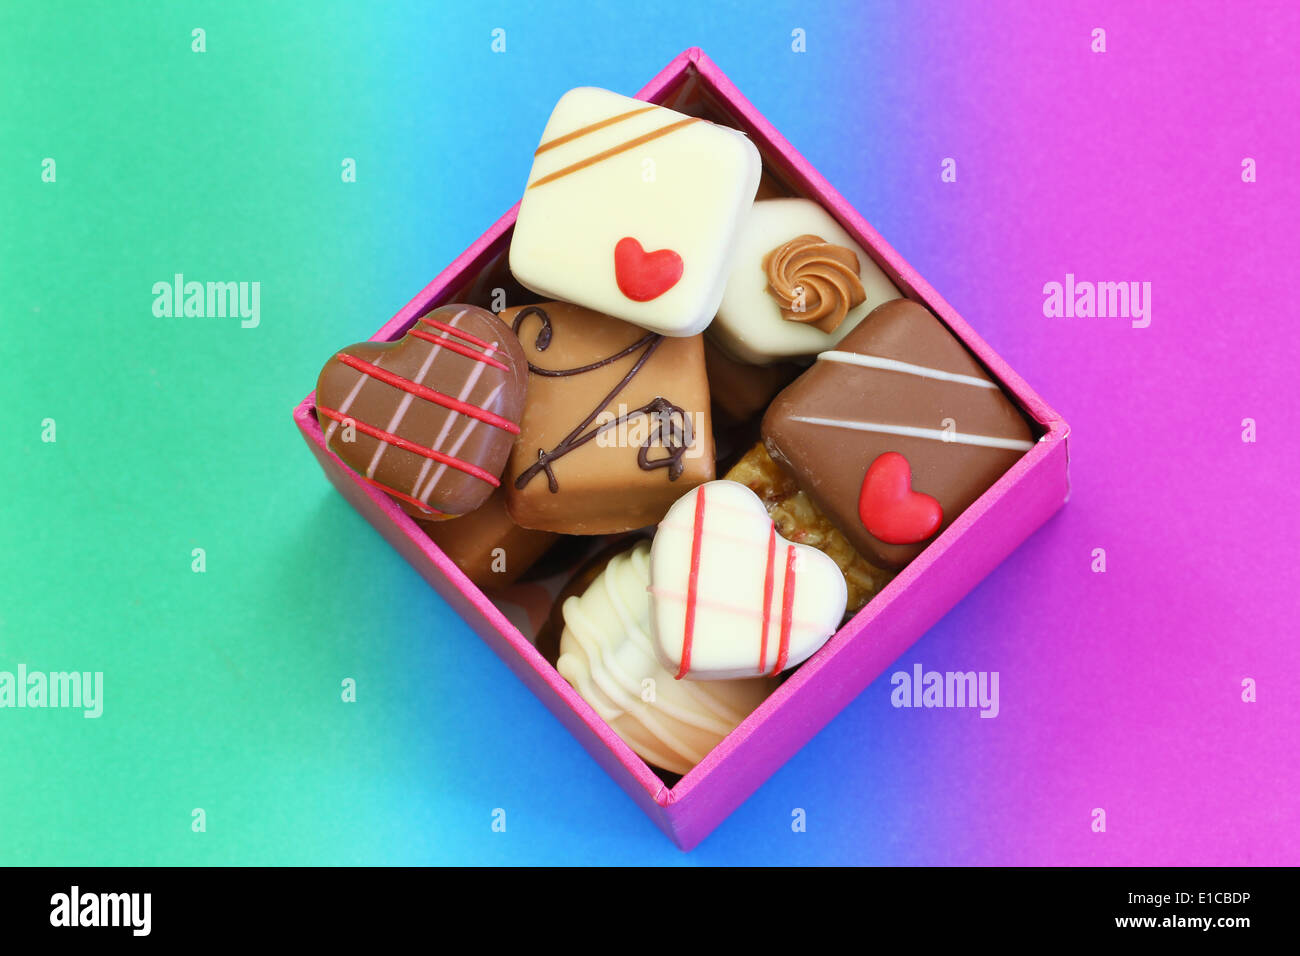 Assorted chocolates in box on colorful background Stock Photo